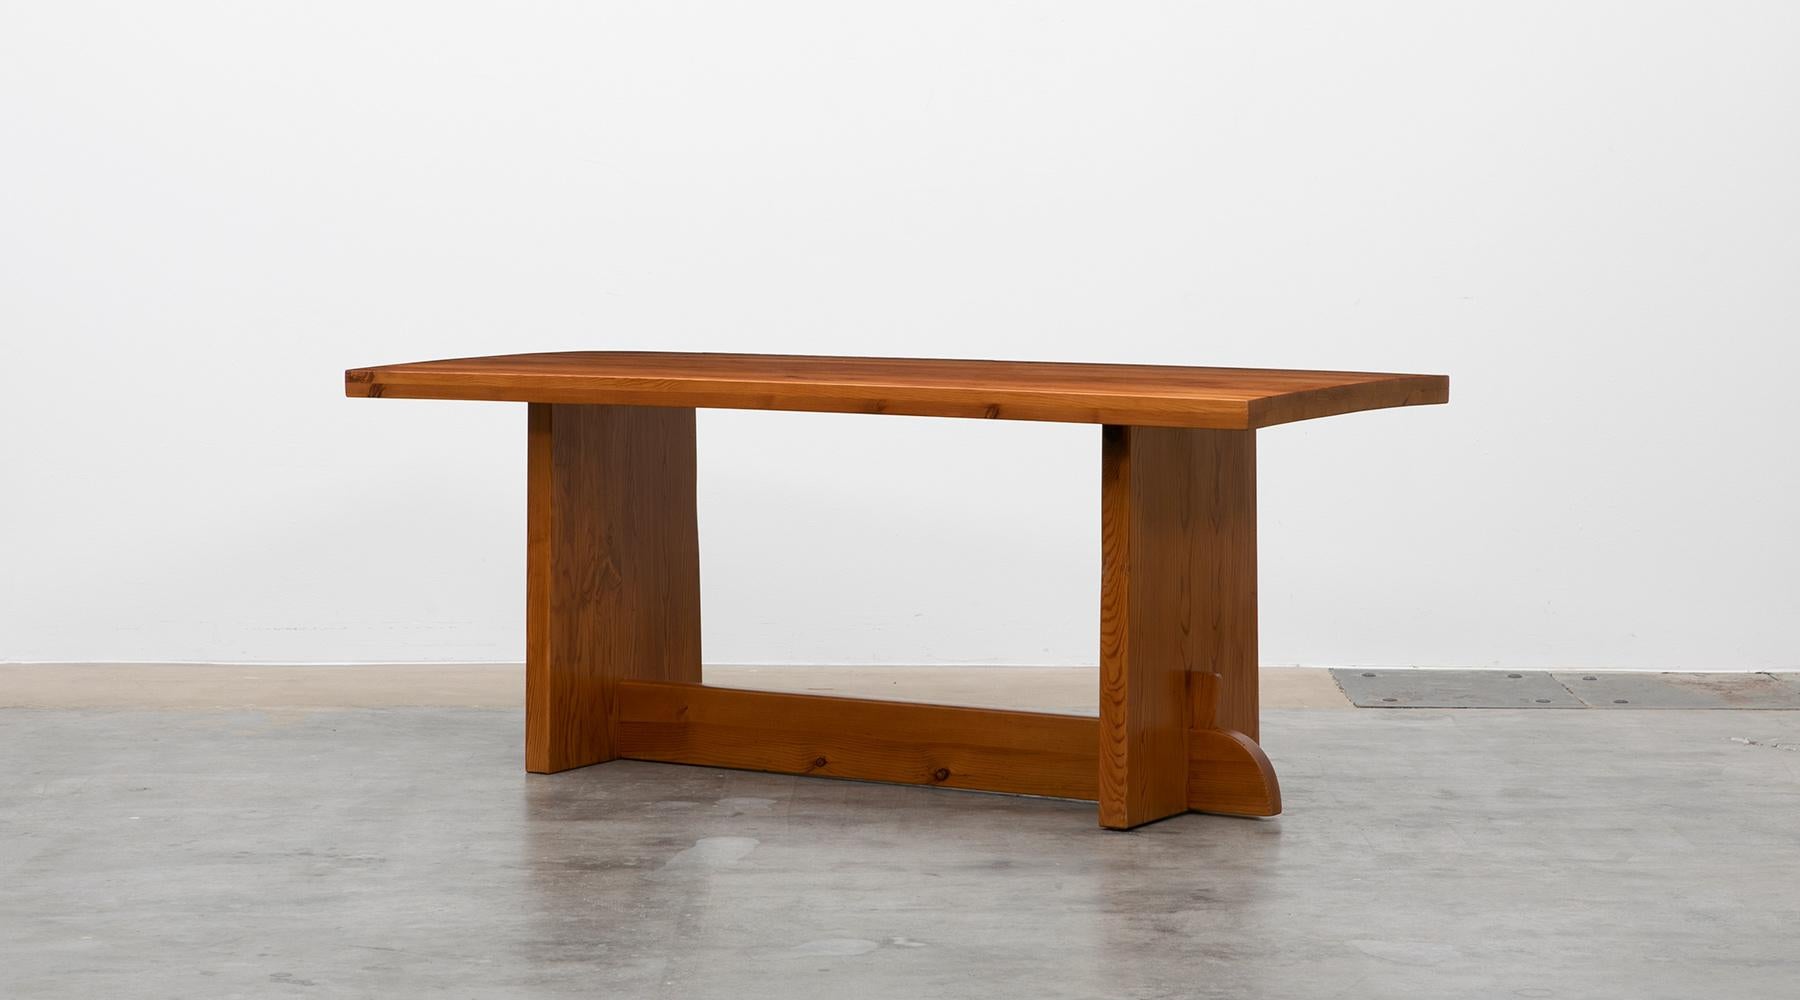 Dining table in pine, very good condition, Axel Einar Hjorth, Sweden, 1932.

The Swedish modernist Axel-Einar Hjorth is best know for his modern reduced design. This Table is one of his masterpieces with beautifully grained Oregon pine with matte